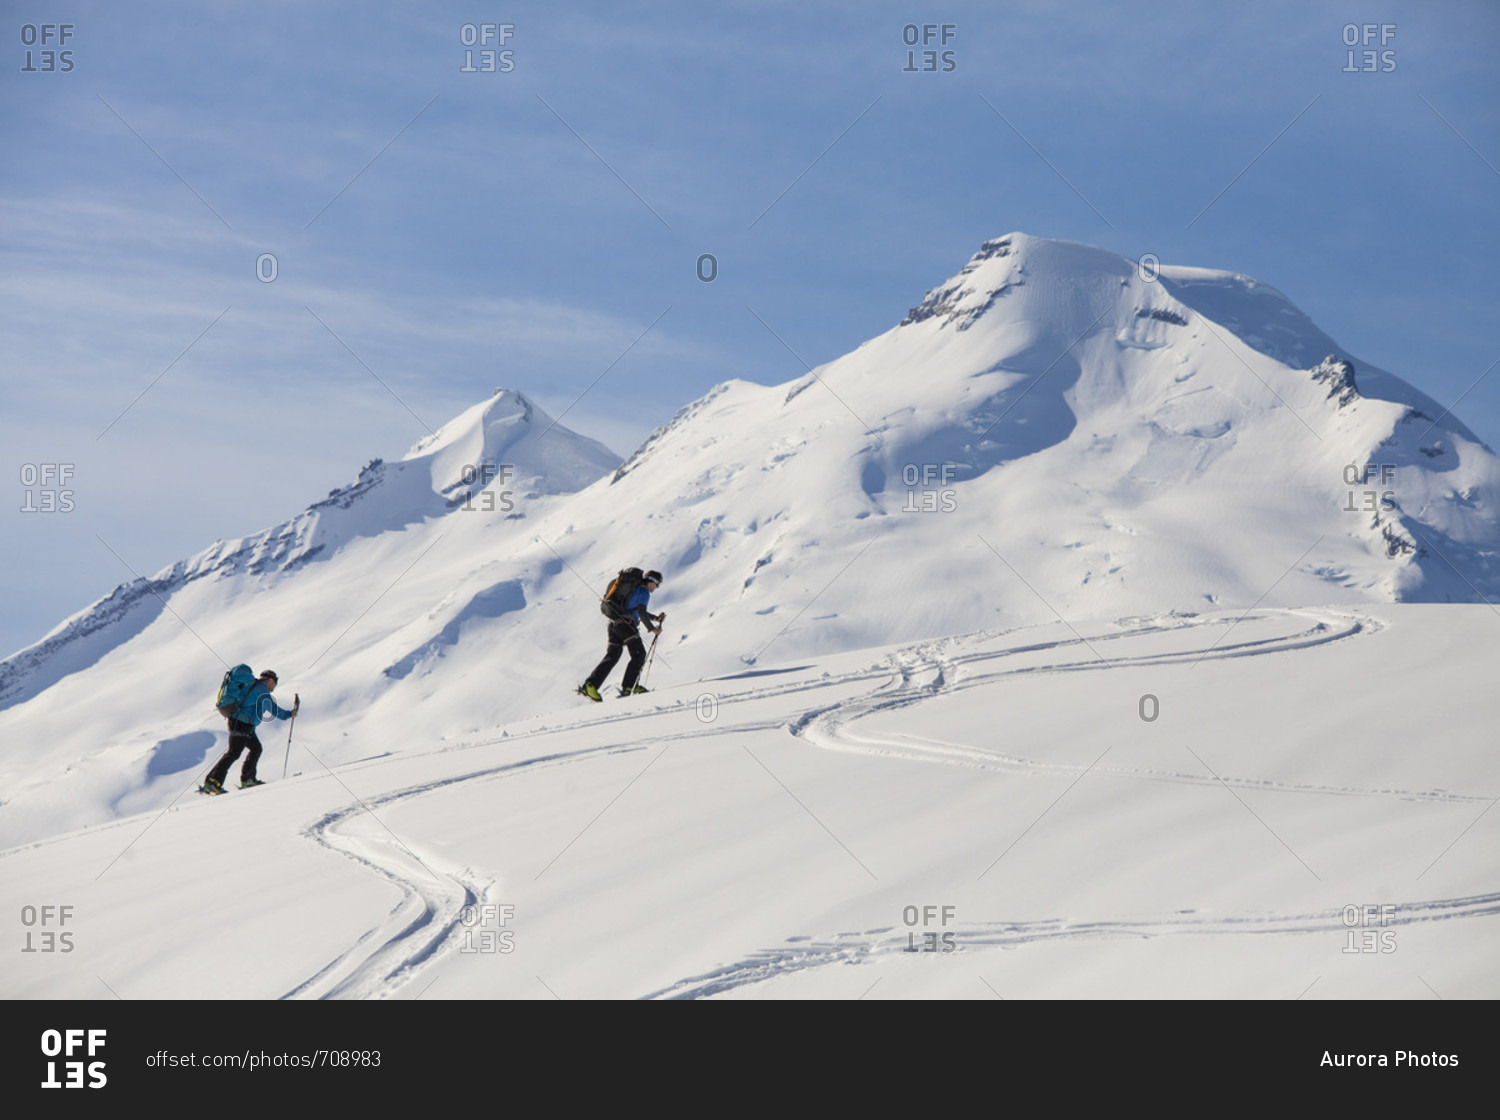 Two men cross-country skiing in North Cascades National Park, Washington State, USA